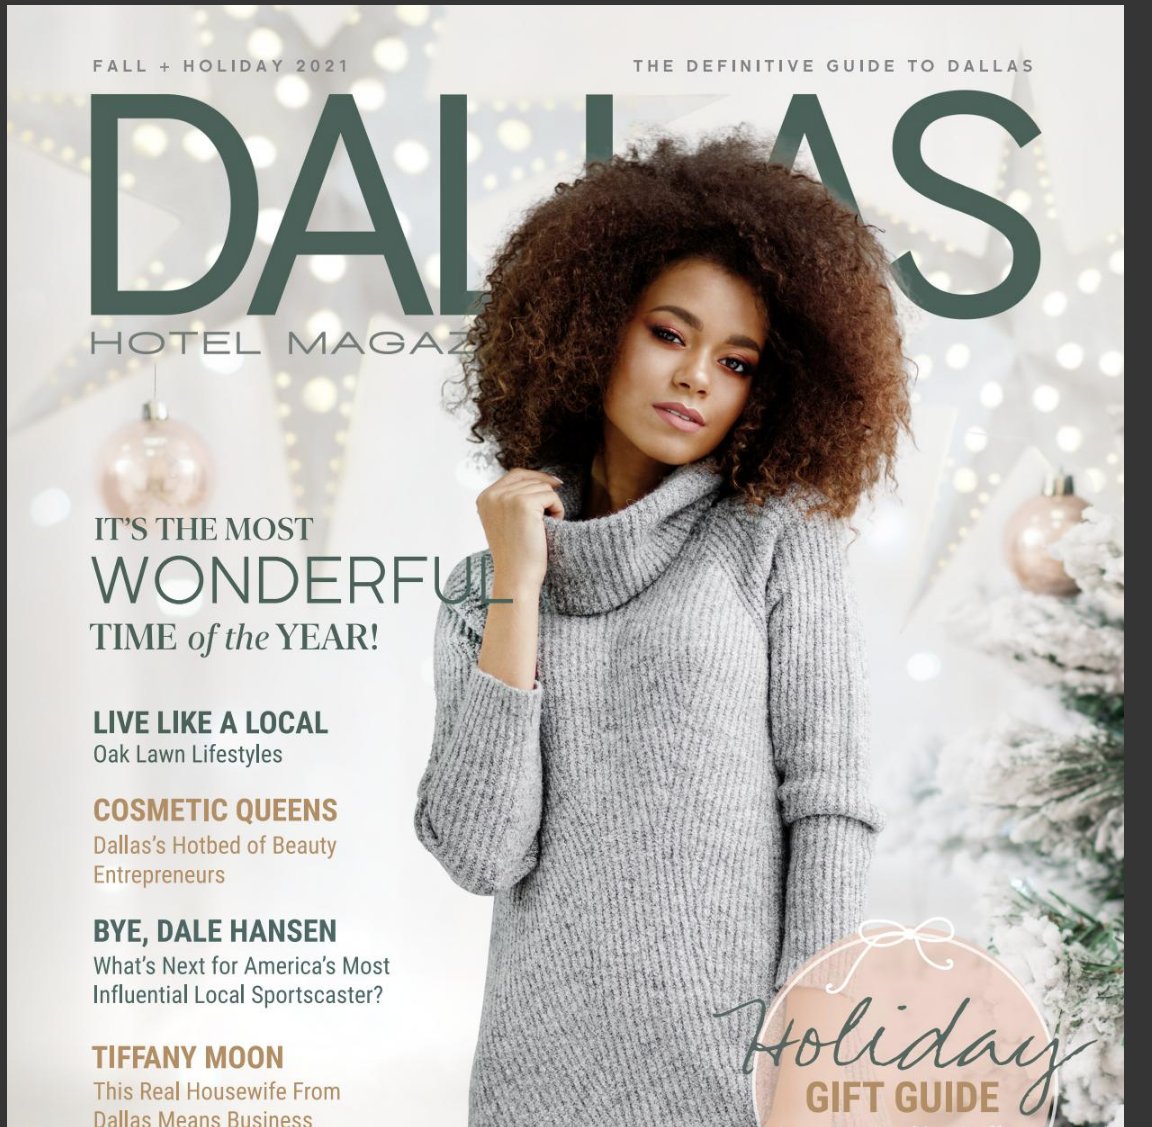 Thanks for the shoutout in the Dallas Hotel Magazine gift guide! Guys LOVE our coffee bean beard oil! Thanks to @DallasHotelMagazine @OhSoCynth for including us in your awesome Fall/Winter 2021 issue! #saveyourface + #savethebees = Hivessence.com